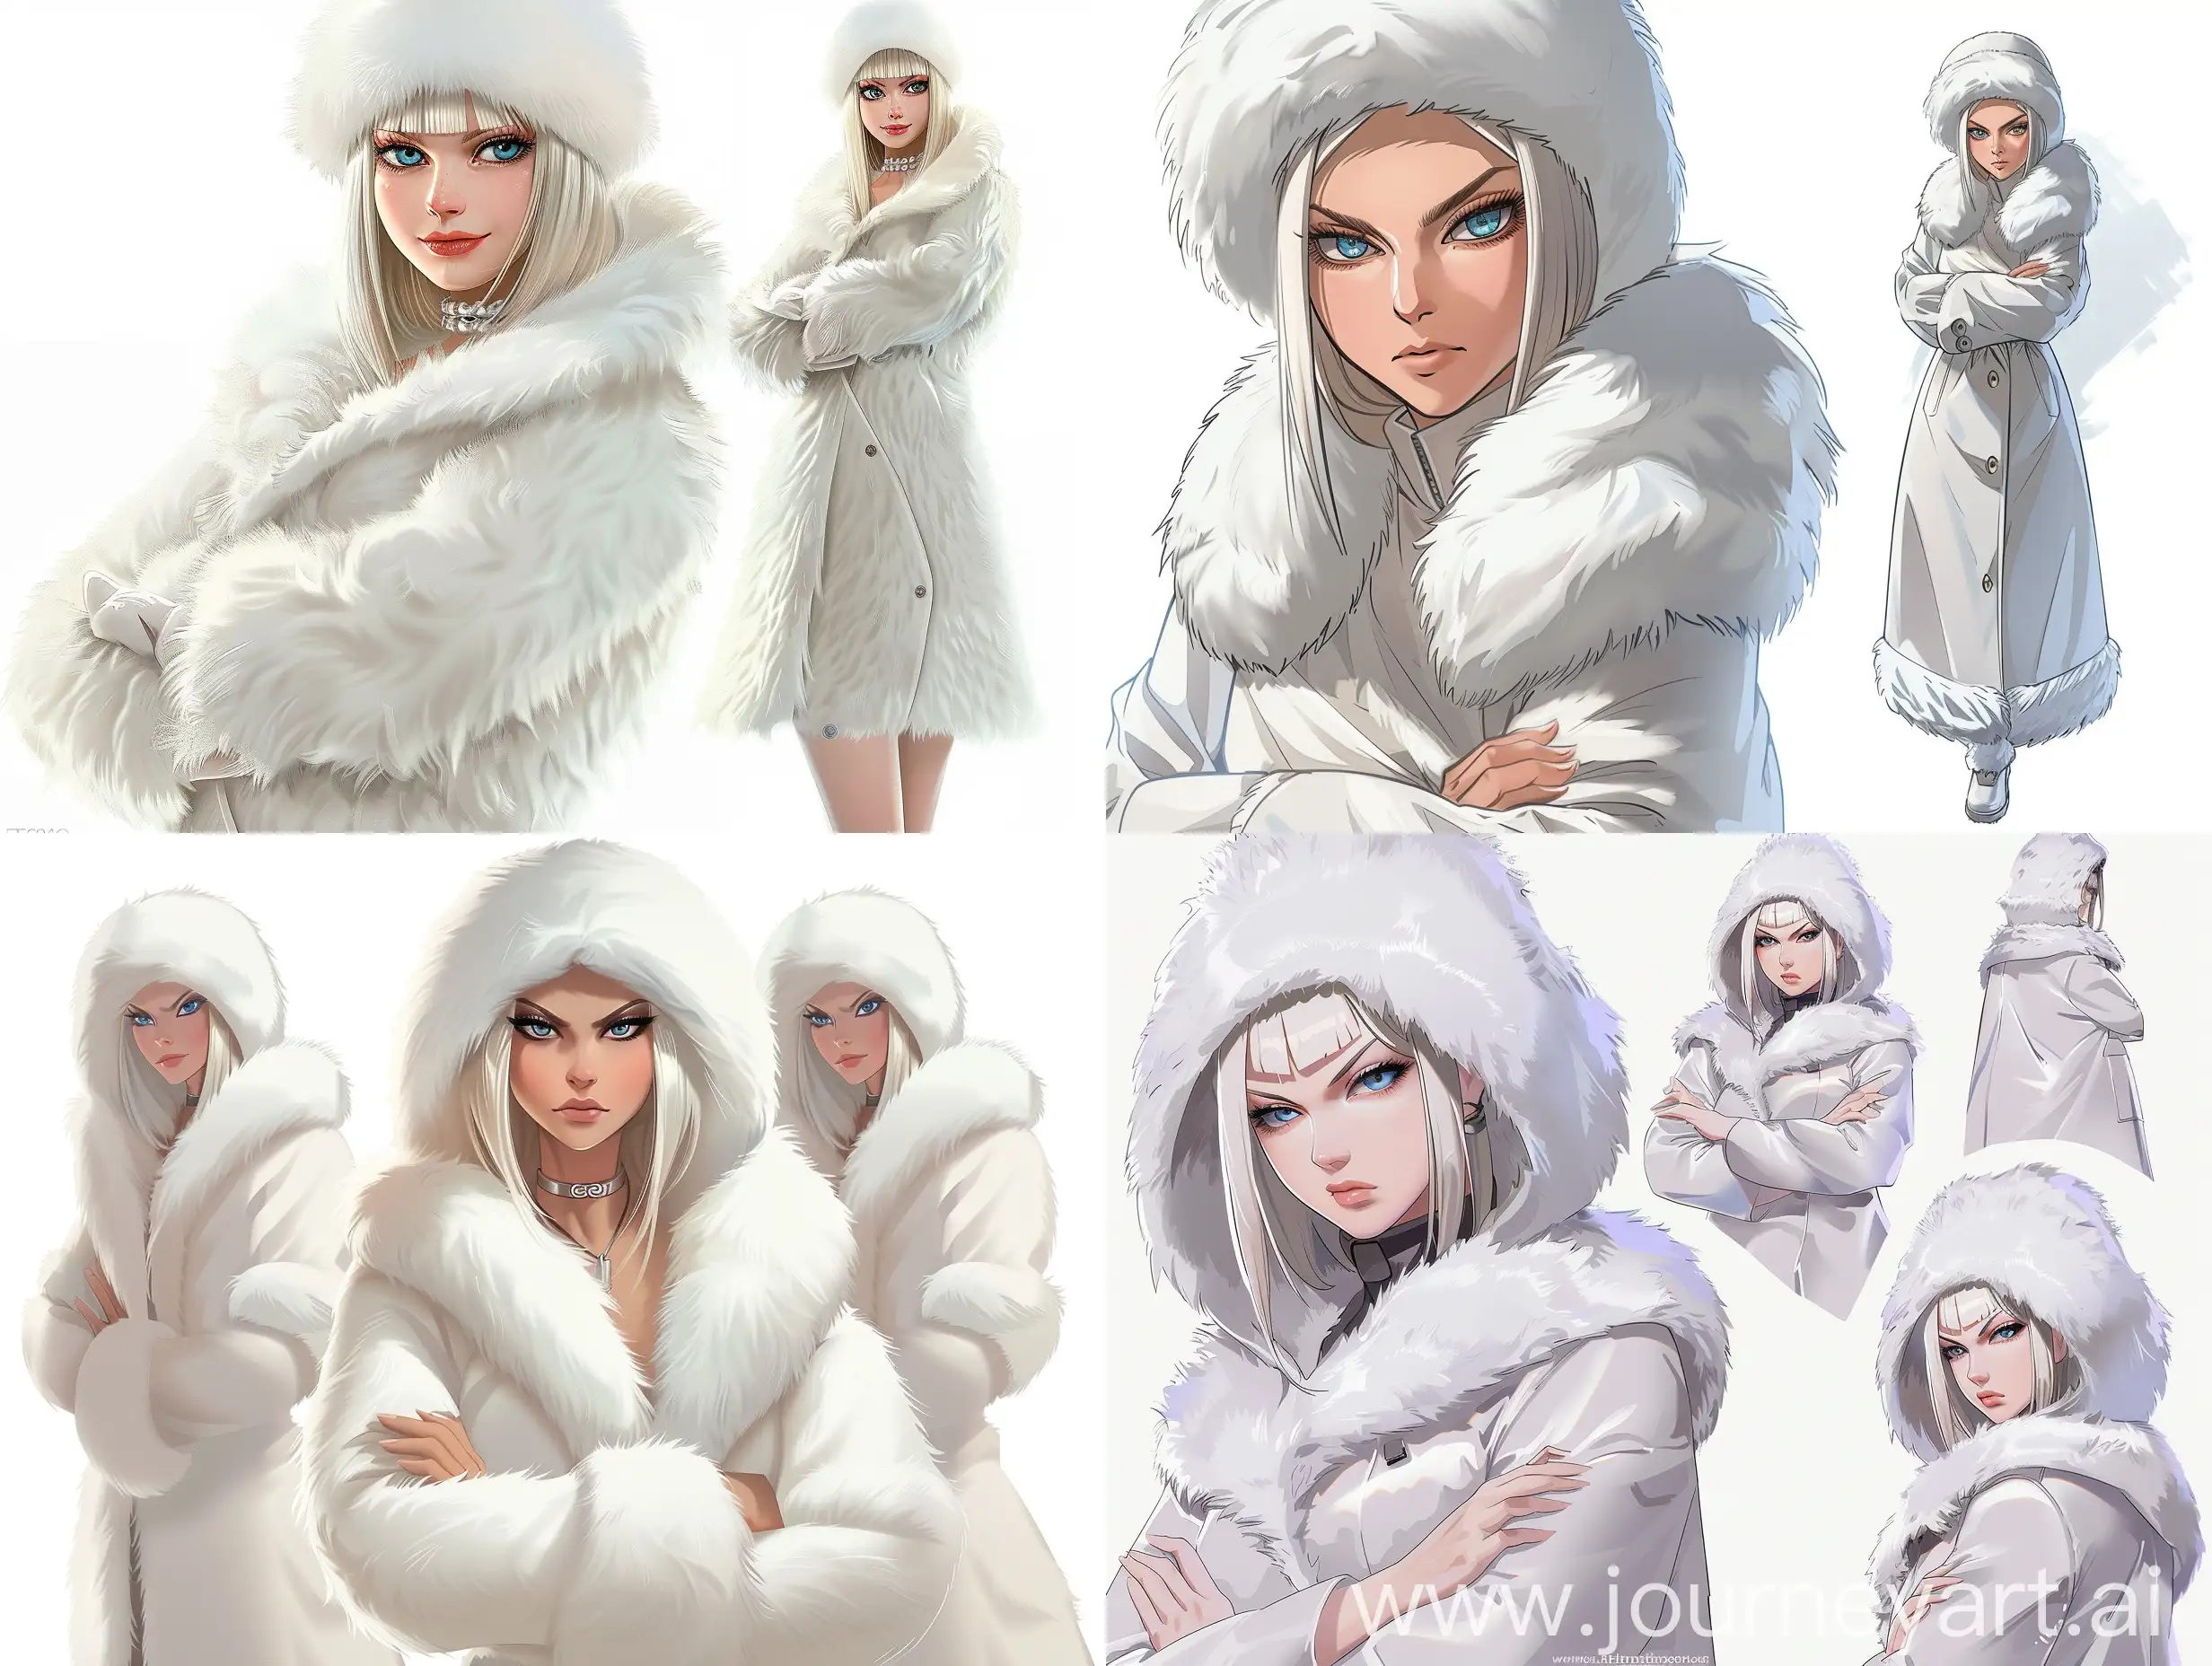 adult woman, arrogant look, rich in appearance, Russian appearance, shoulder-length straight blonde hair, white fur hat, blue eyes, dressed in a white fluffy fur coat completely covering her, shown in full height with her arms crossed, on a white background, in different directions concept art, anime style